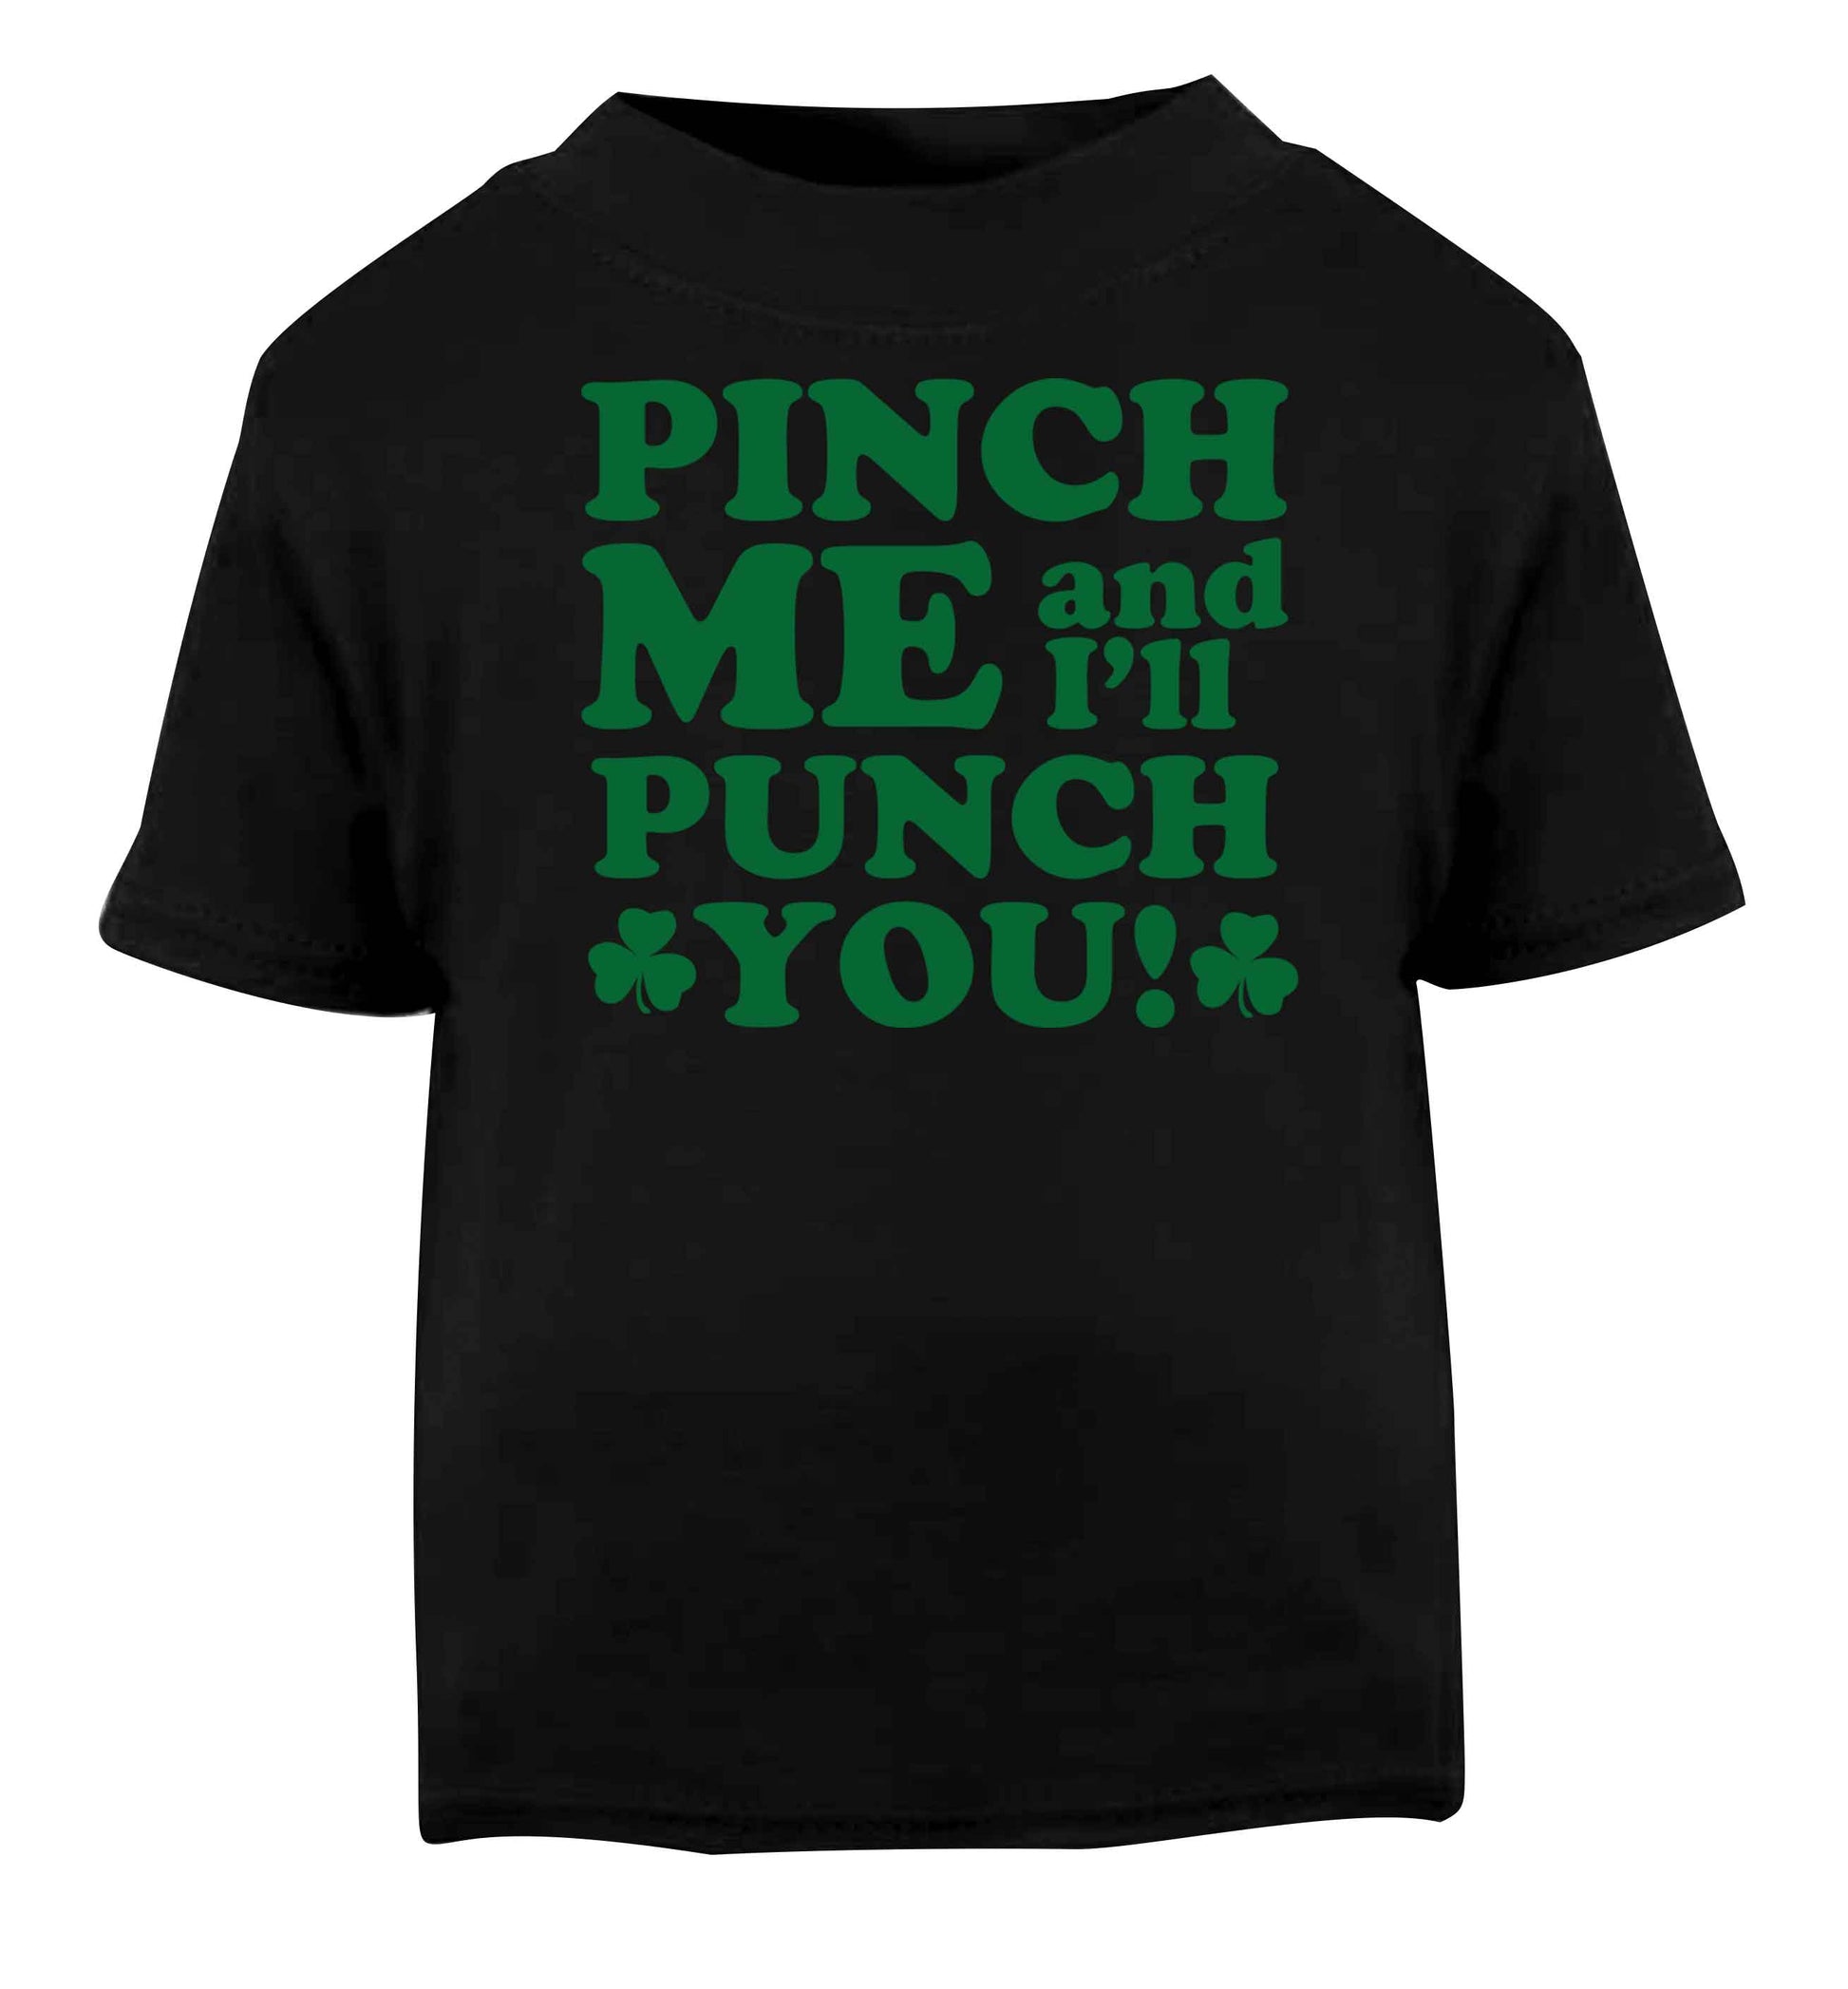 Pinch me and I'll punch you Black baby toddler Tshirt 2 years